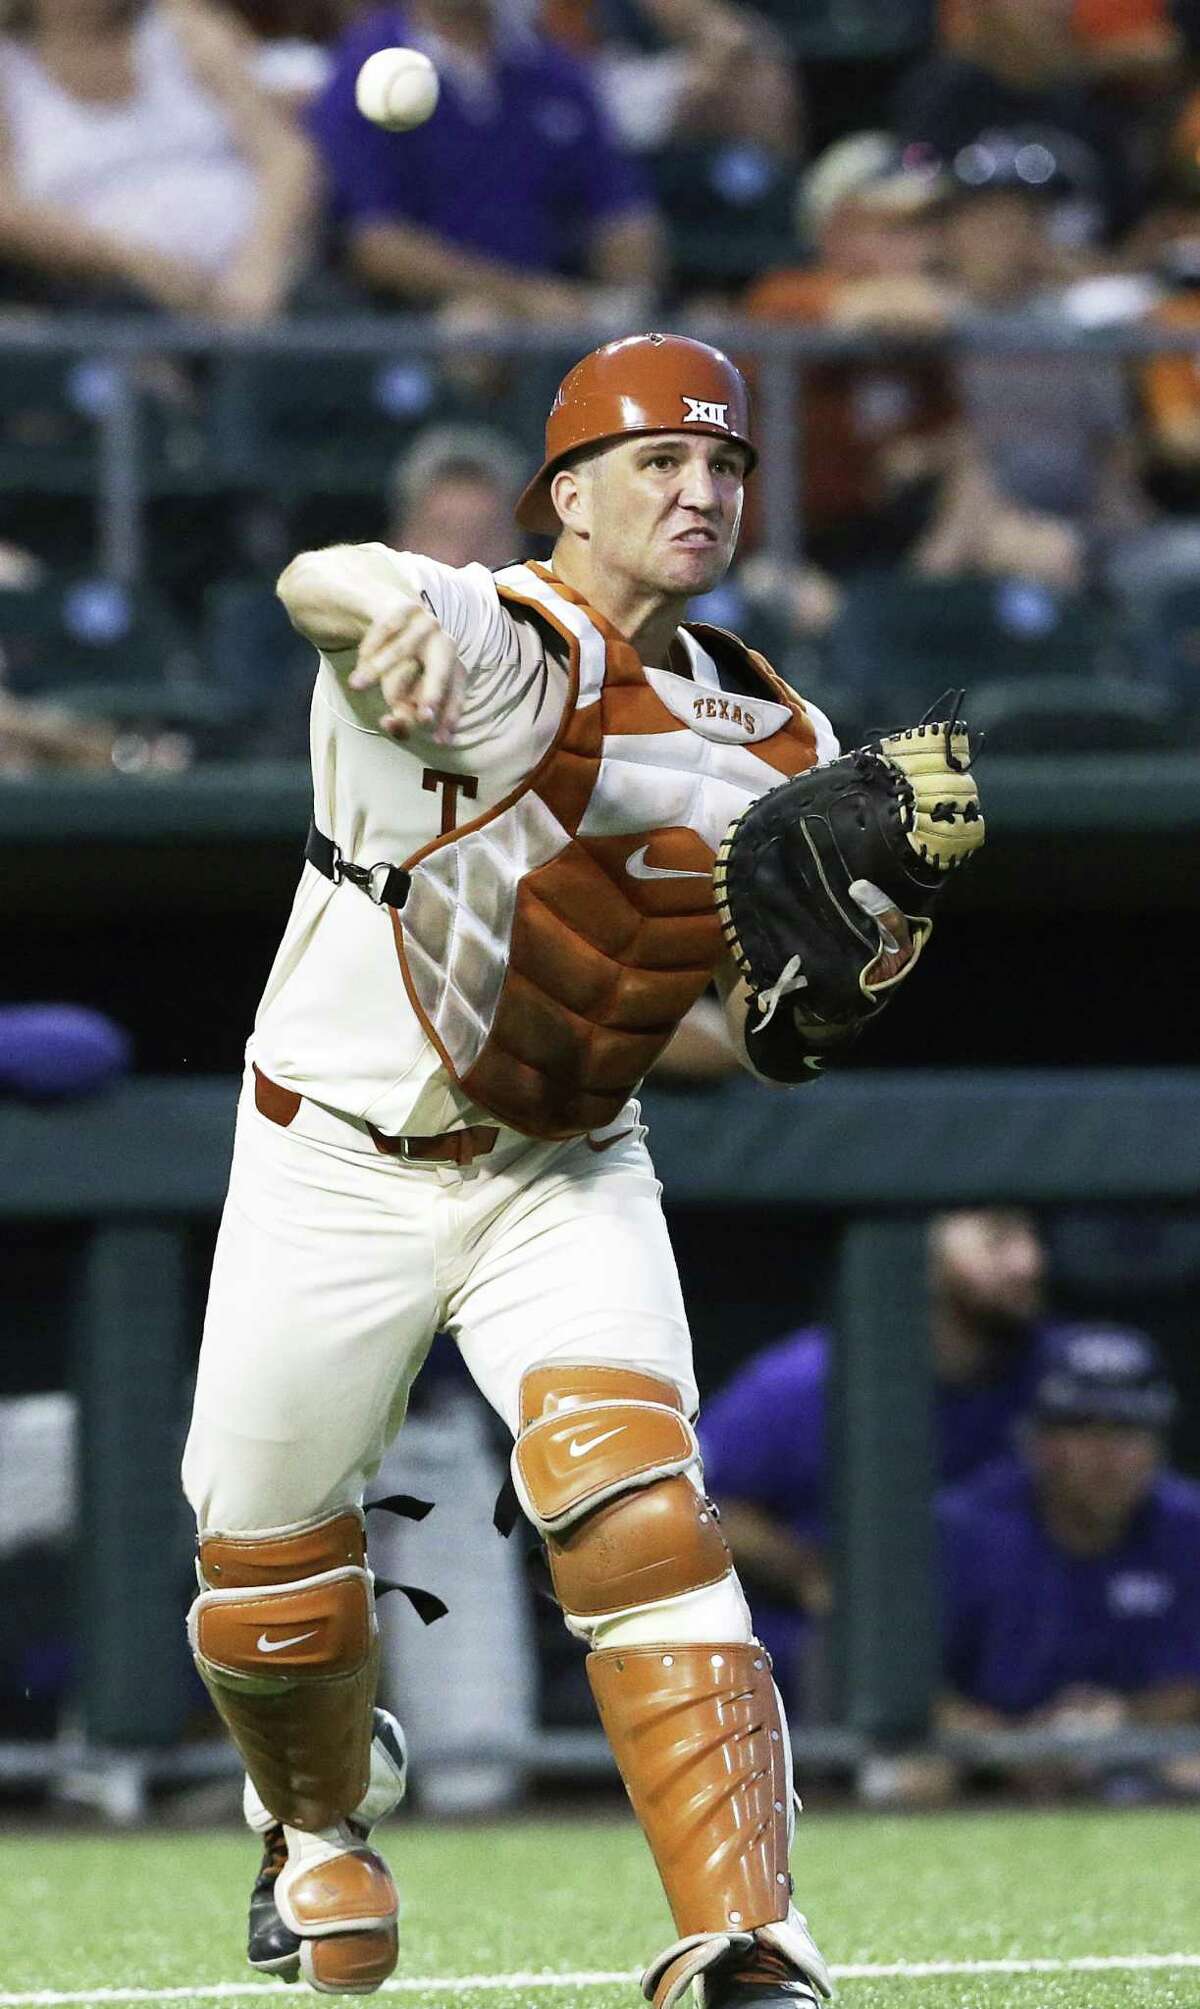 Longhorn catcher DJ Petrinsky throws out a runner at first on a bunt try as UT hosts TCU in men's baseball at Disch-Falk Field on May 18, 2018.